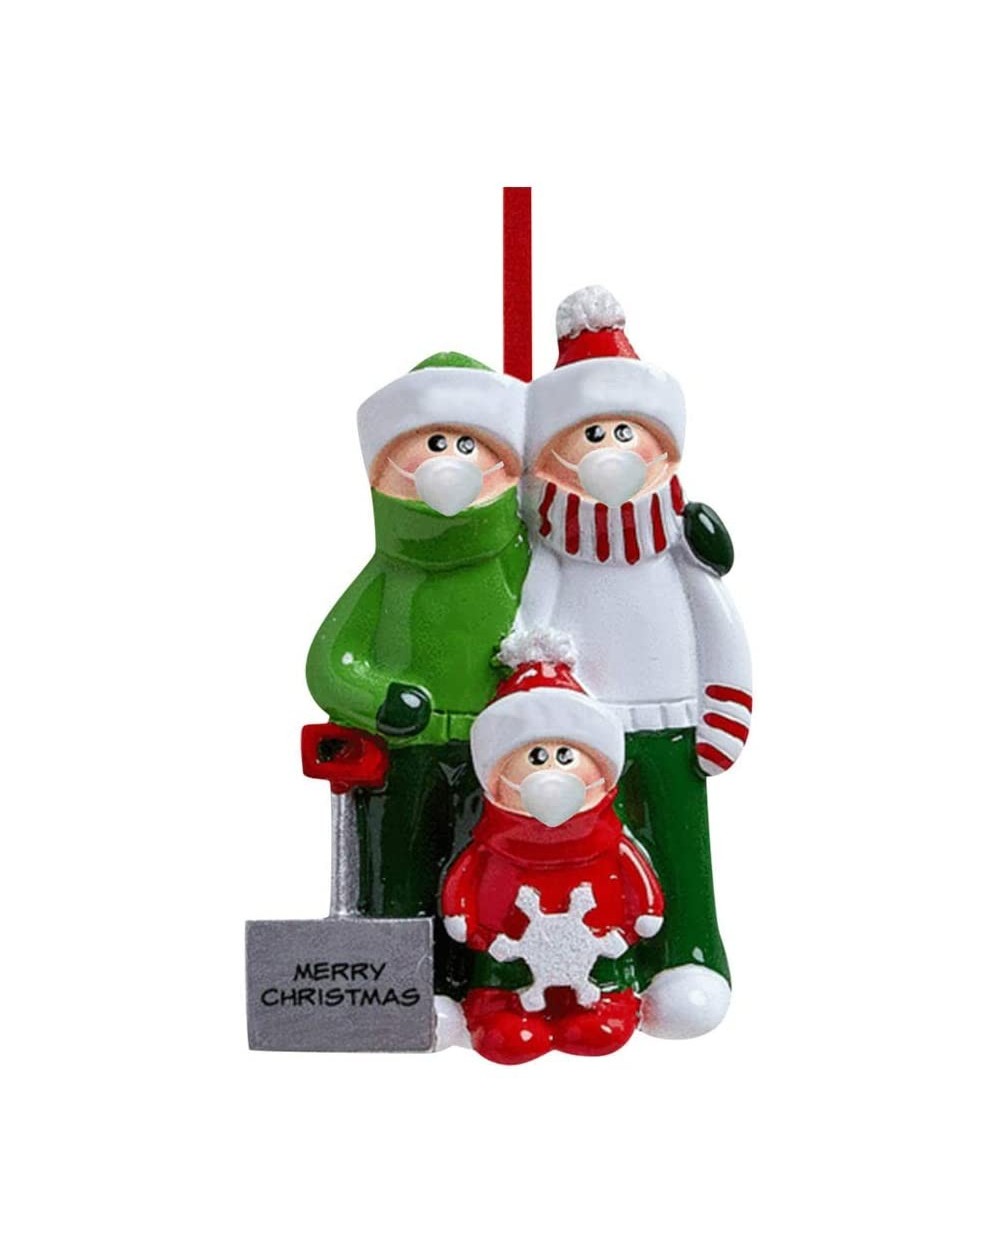 Ornaments 2020 Christmas Party Decorations Kit Creative Gift Survivor of 1-7 Members Ornaments1-3PC(1PC-3People-AE-Multi) - A...